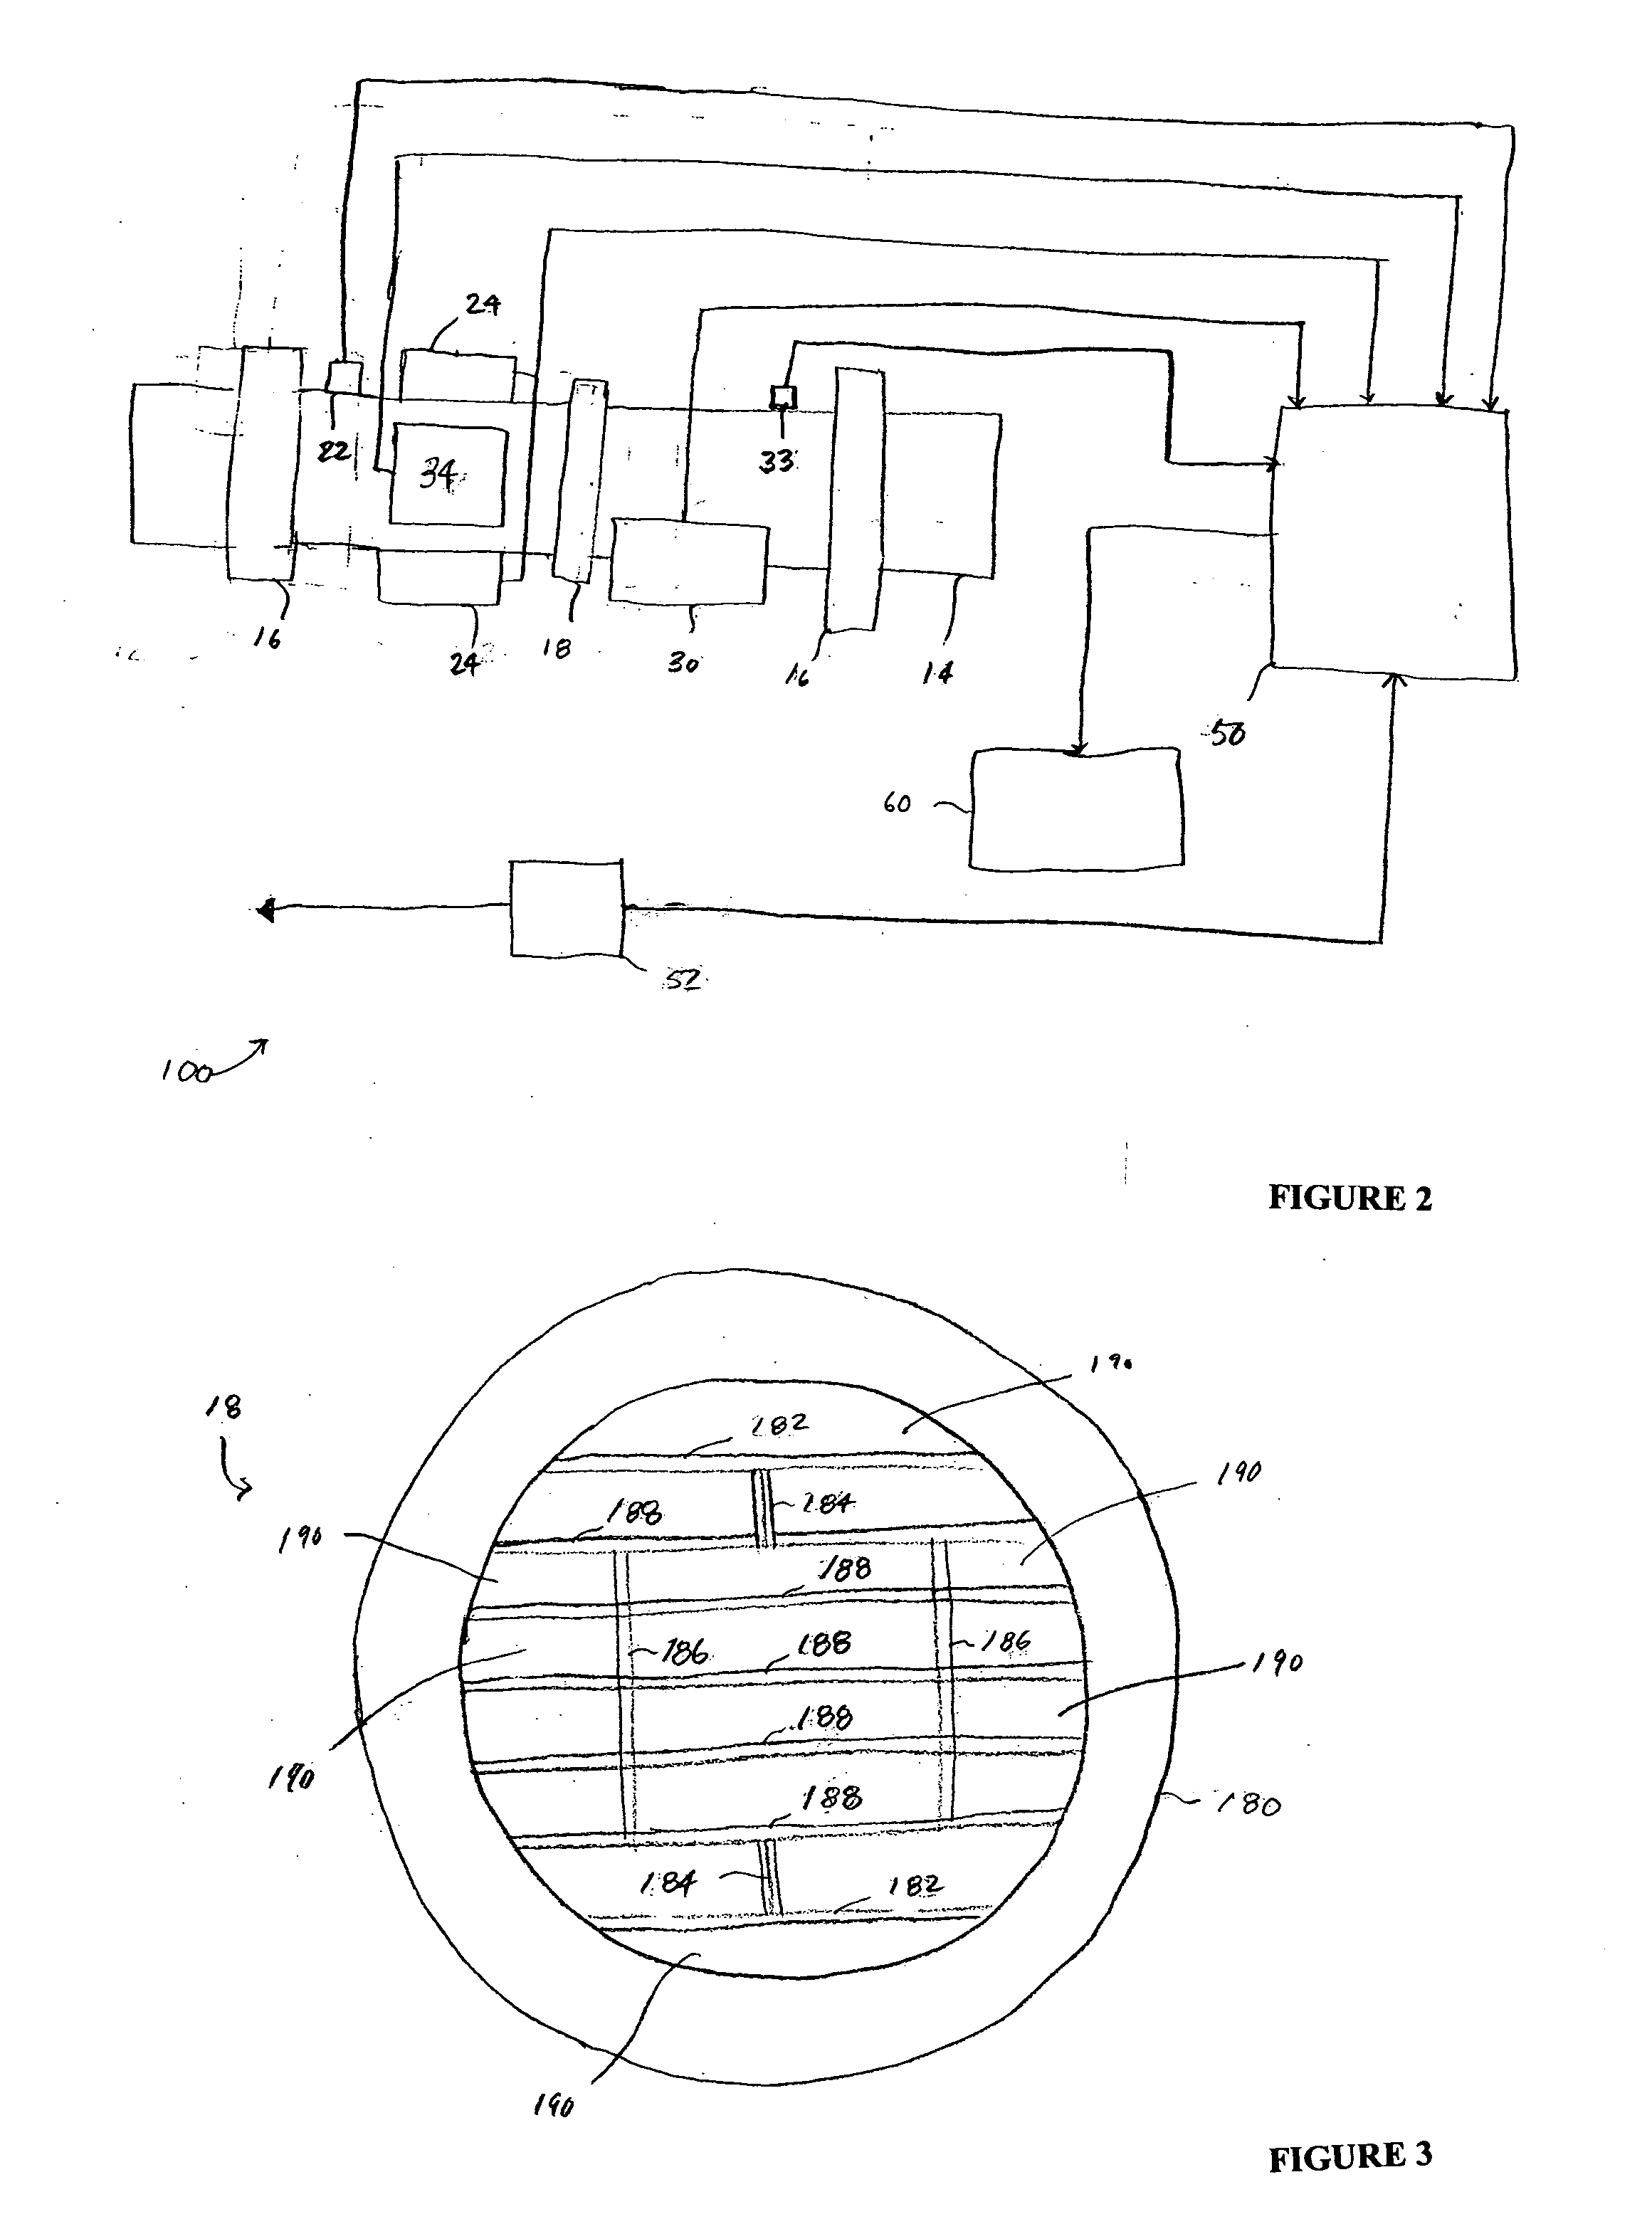 System, method and device for aiding in the diagnosis of respiratory dysfunction